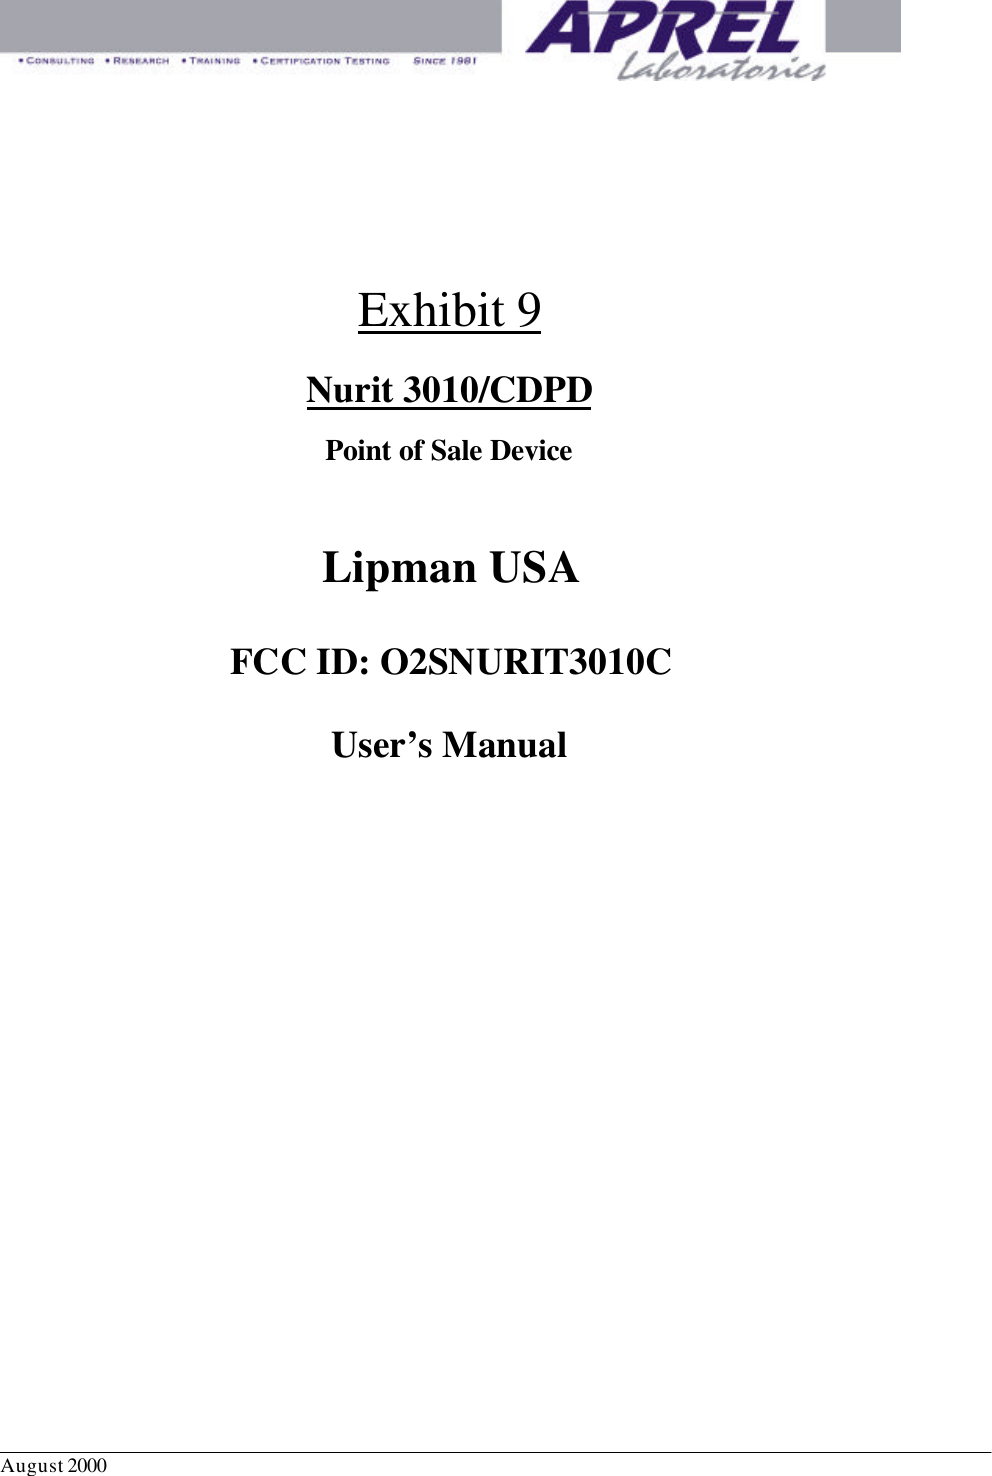 August 2000 Exhibit 9Nurit 3010/CDPDPoint of Sale DeviceLipman USAFCC ID: O2SNURIT3010CUser’s Manual